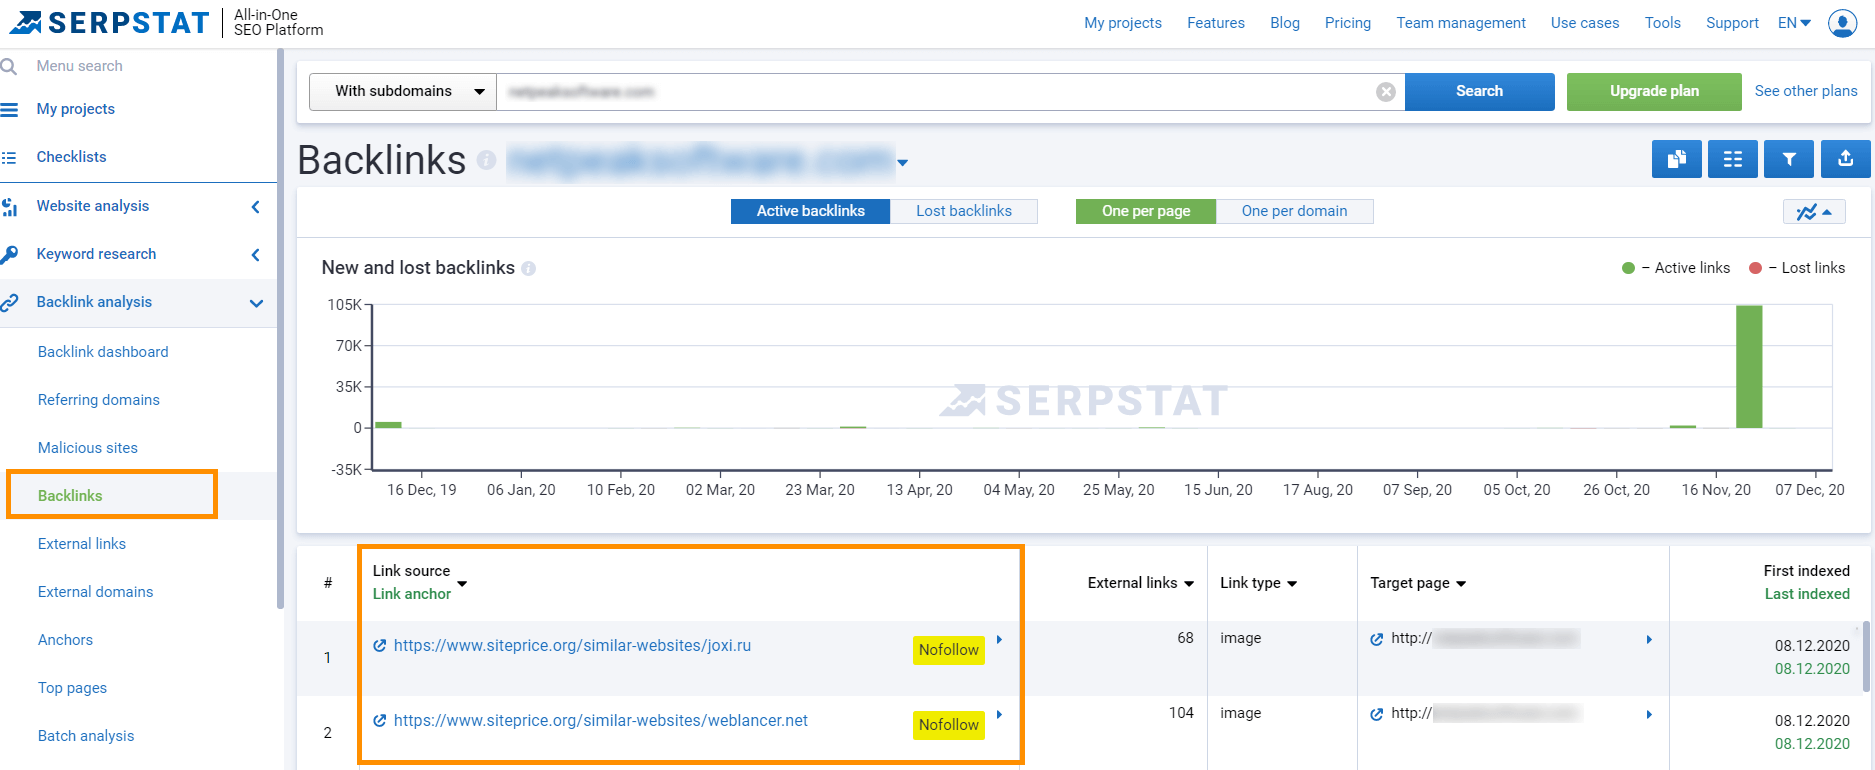 You can export backlinks from Serpstat